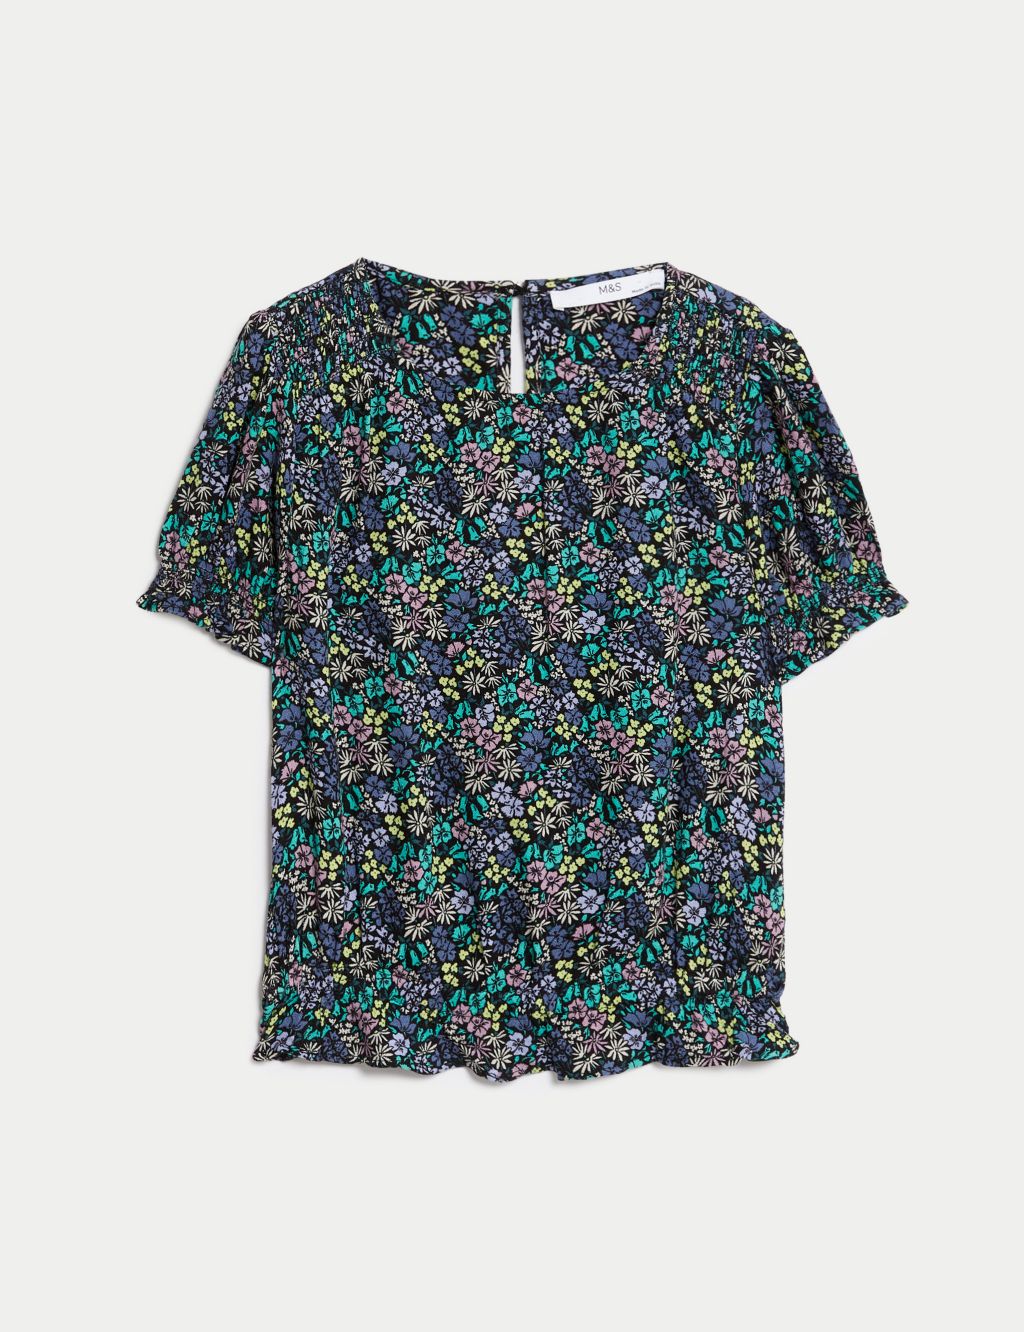 Floral Blouse Top (6-16 Yrs) image 2